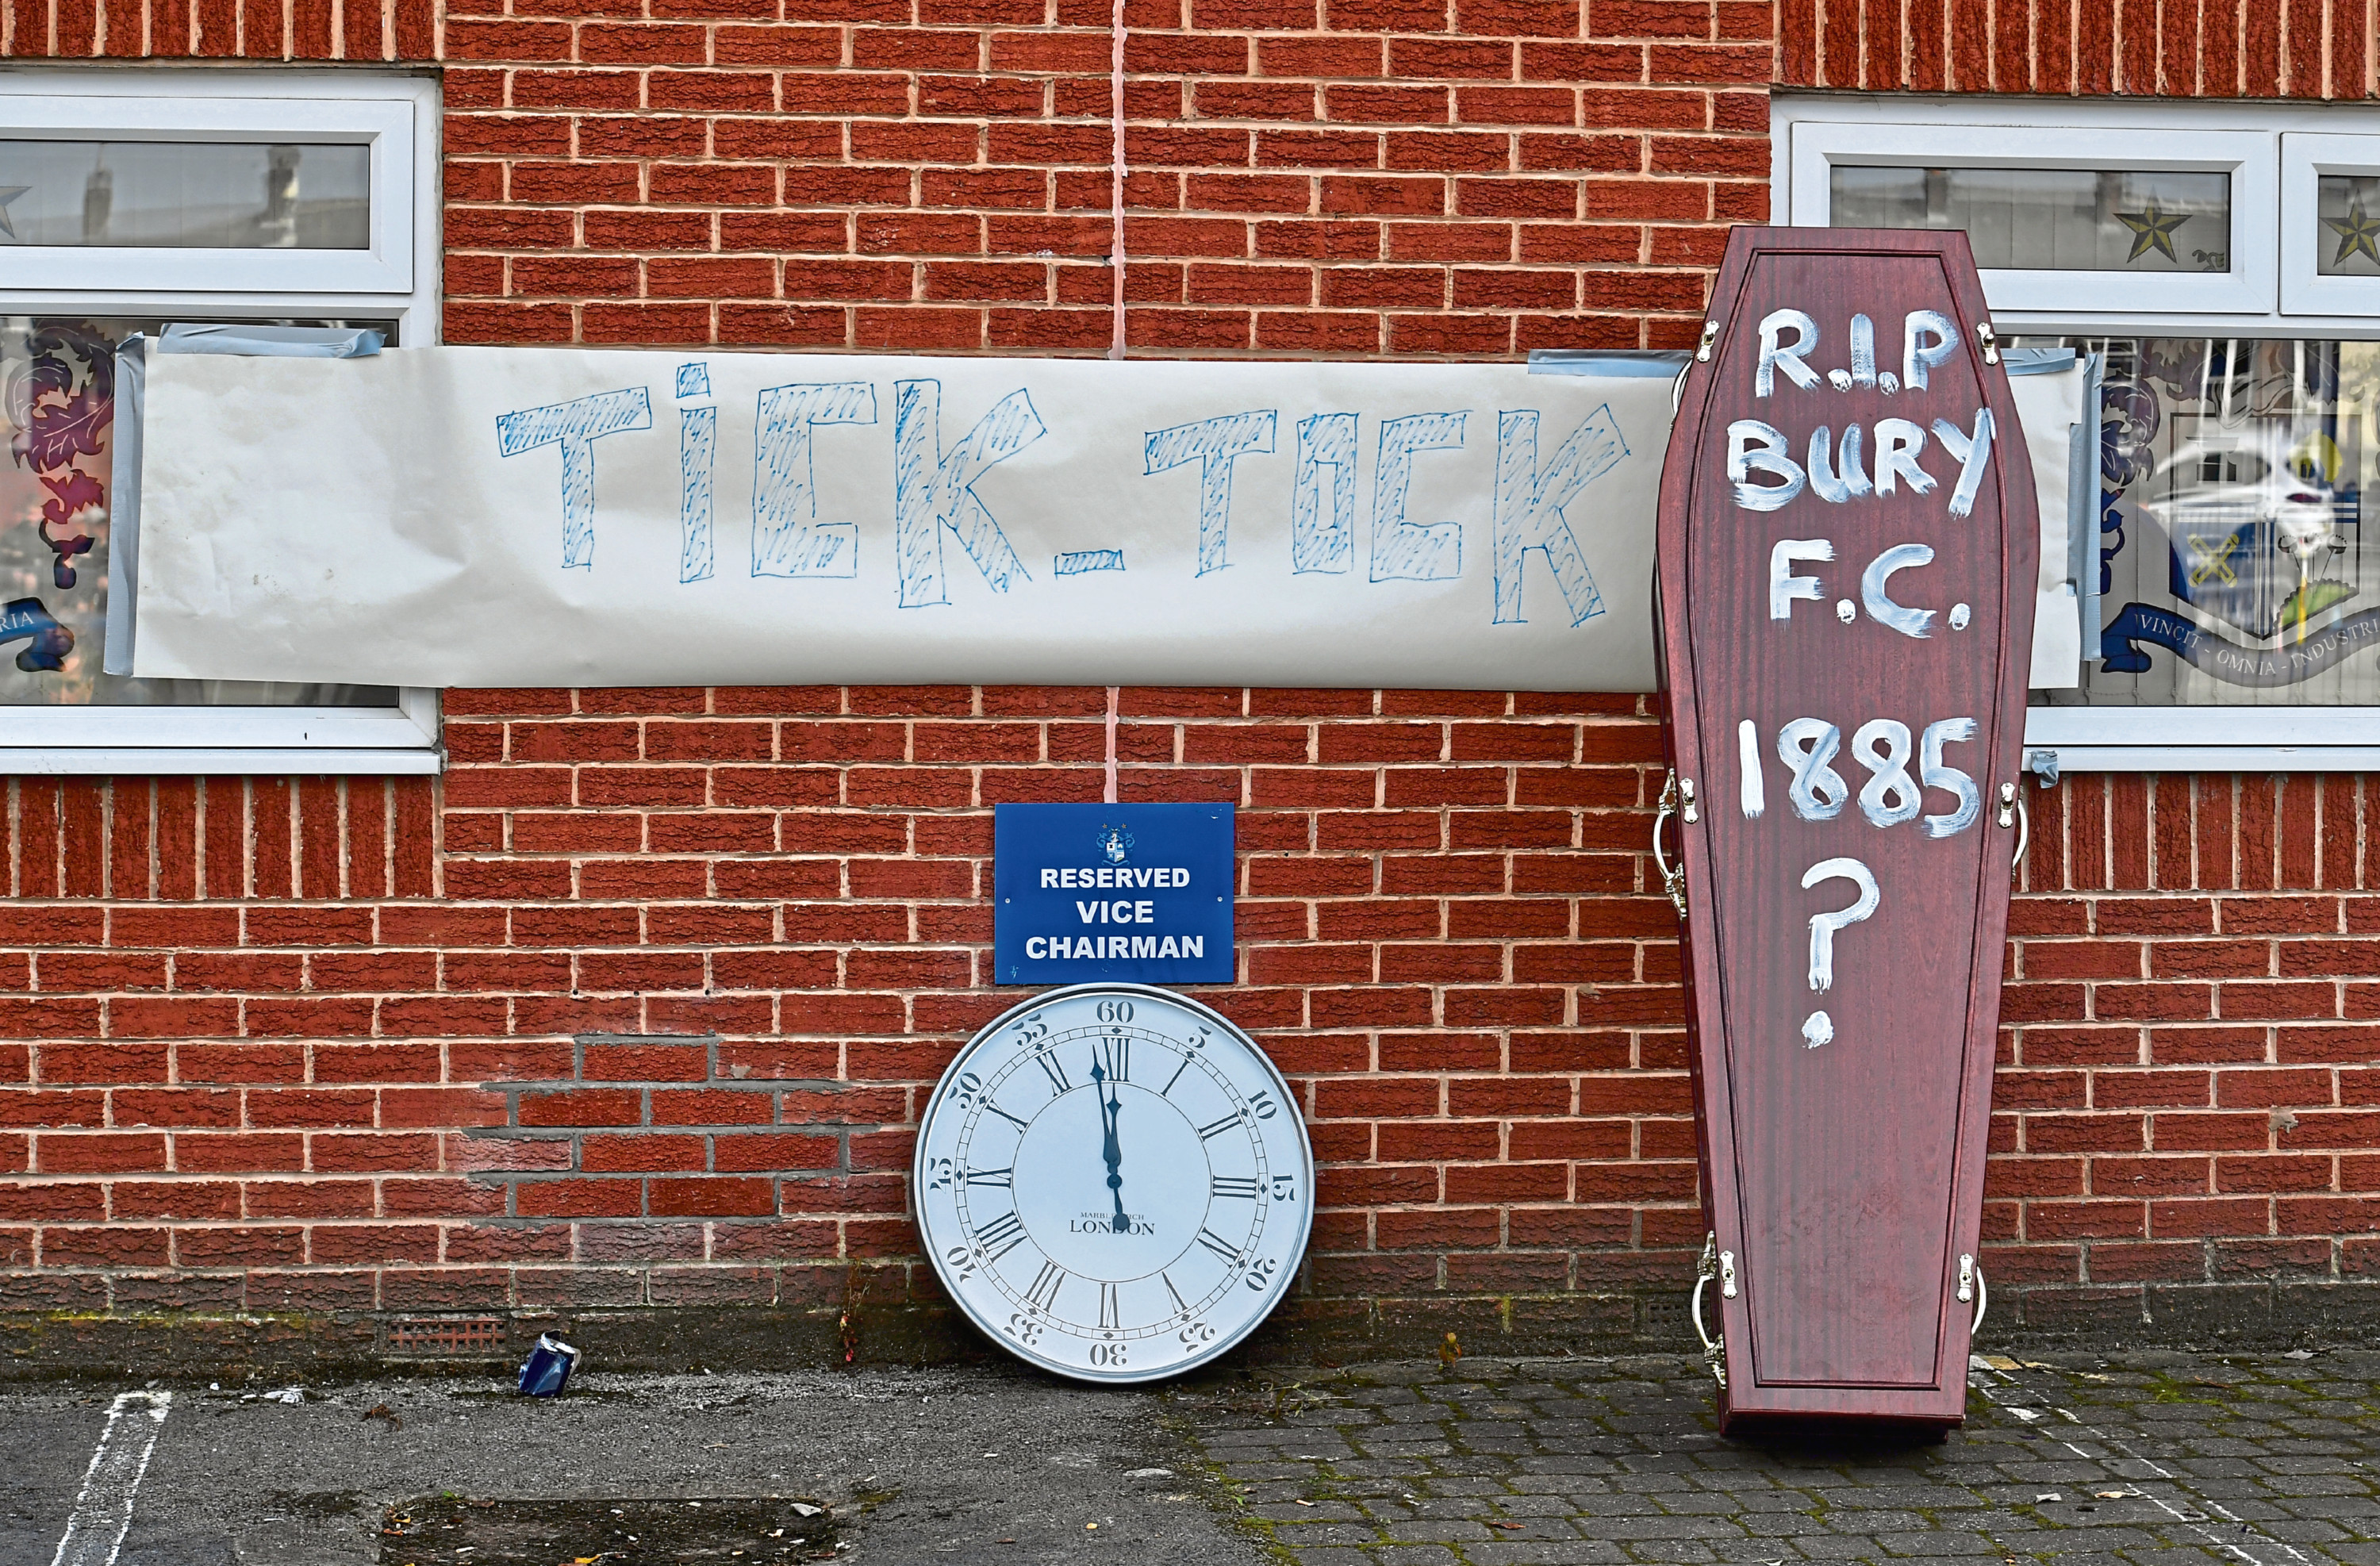 Bury fans deliver a symbolic coffin reading 'R.I.P Bury F.C. 1885 ?' and clock at Gigg Lane, home of Bury FC.